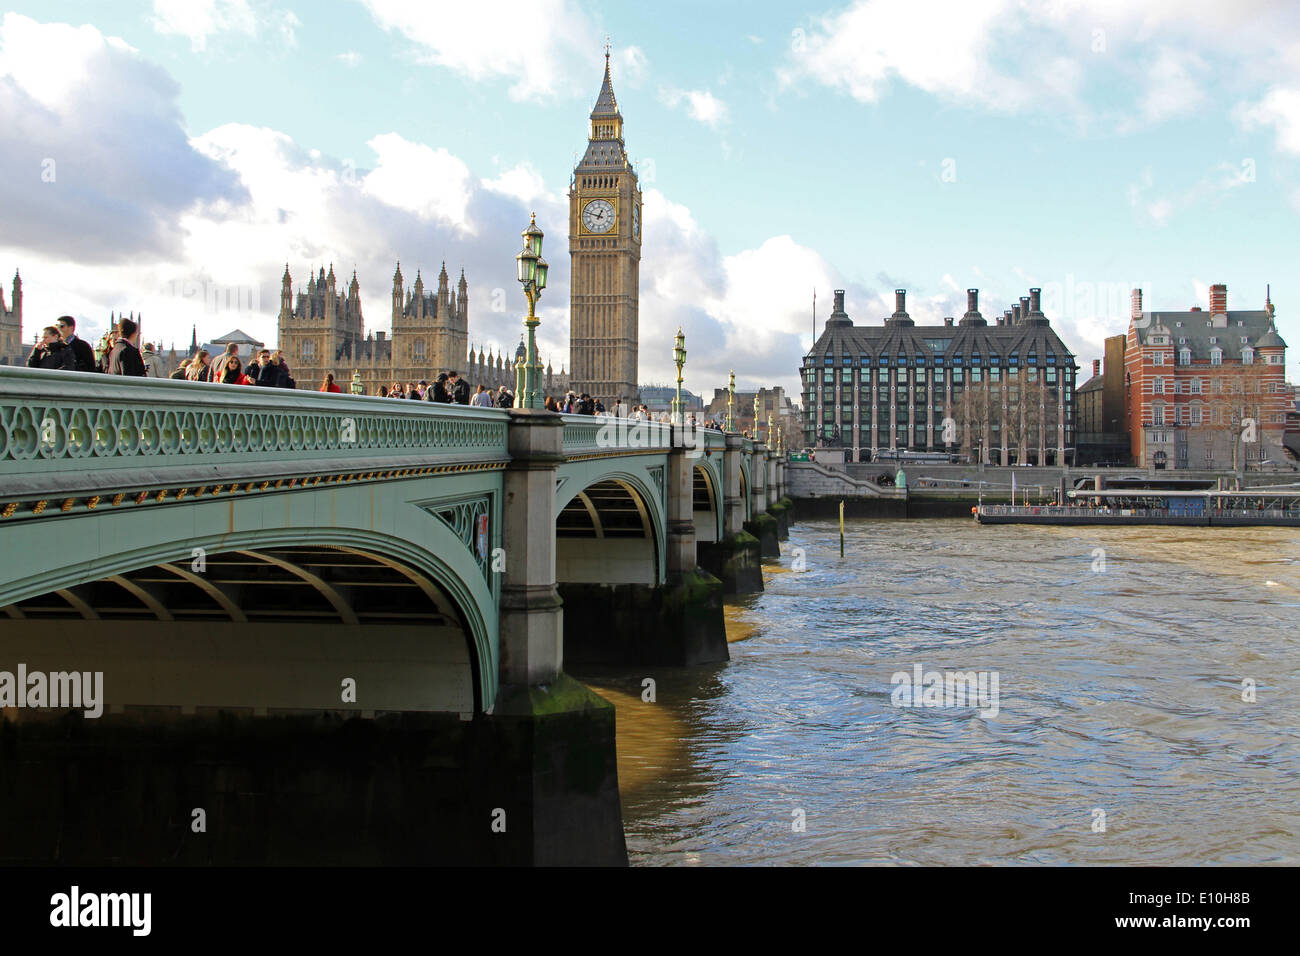 London: Palace of Westminster with Big Ben (Elizabeth Tower) Stock Photo